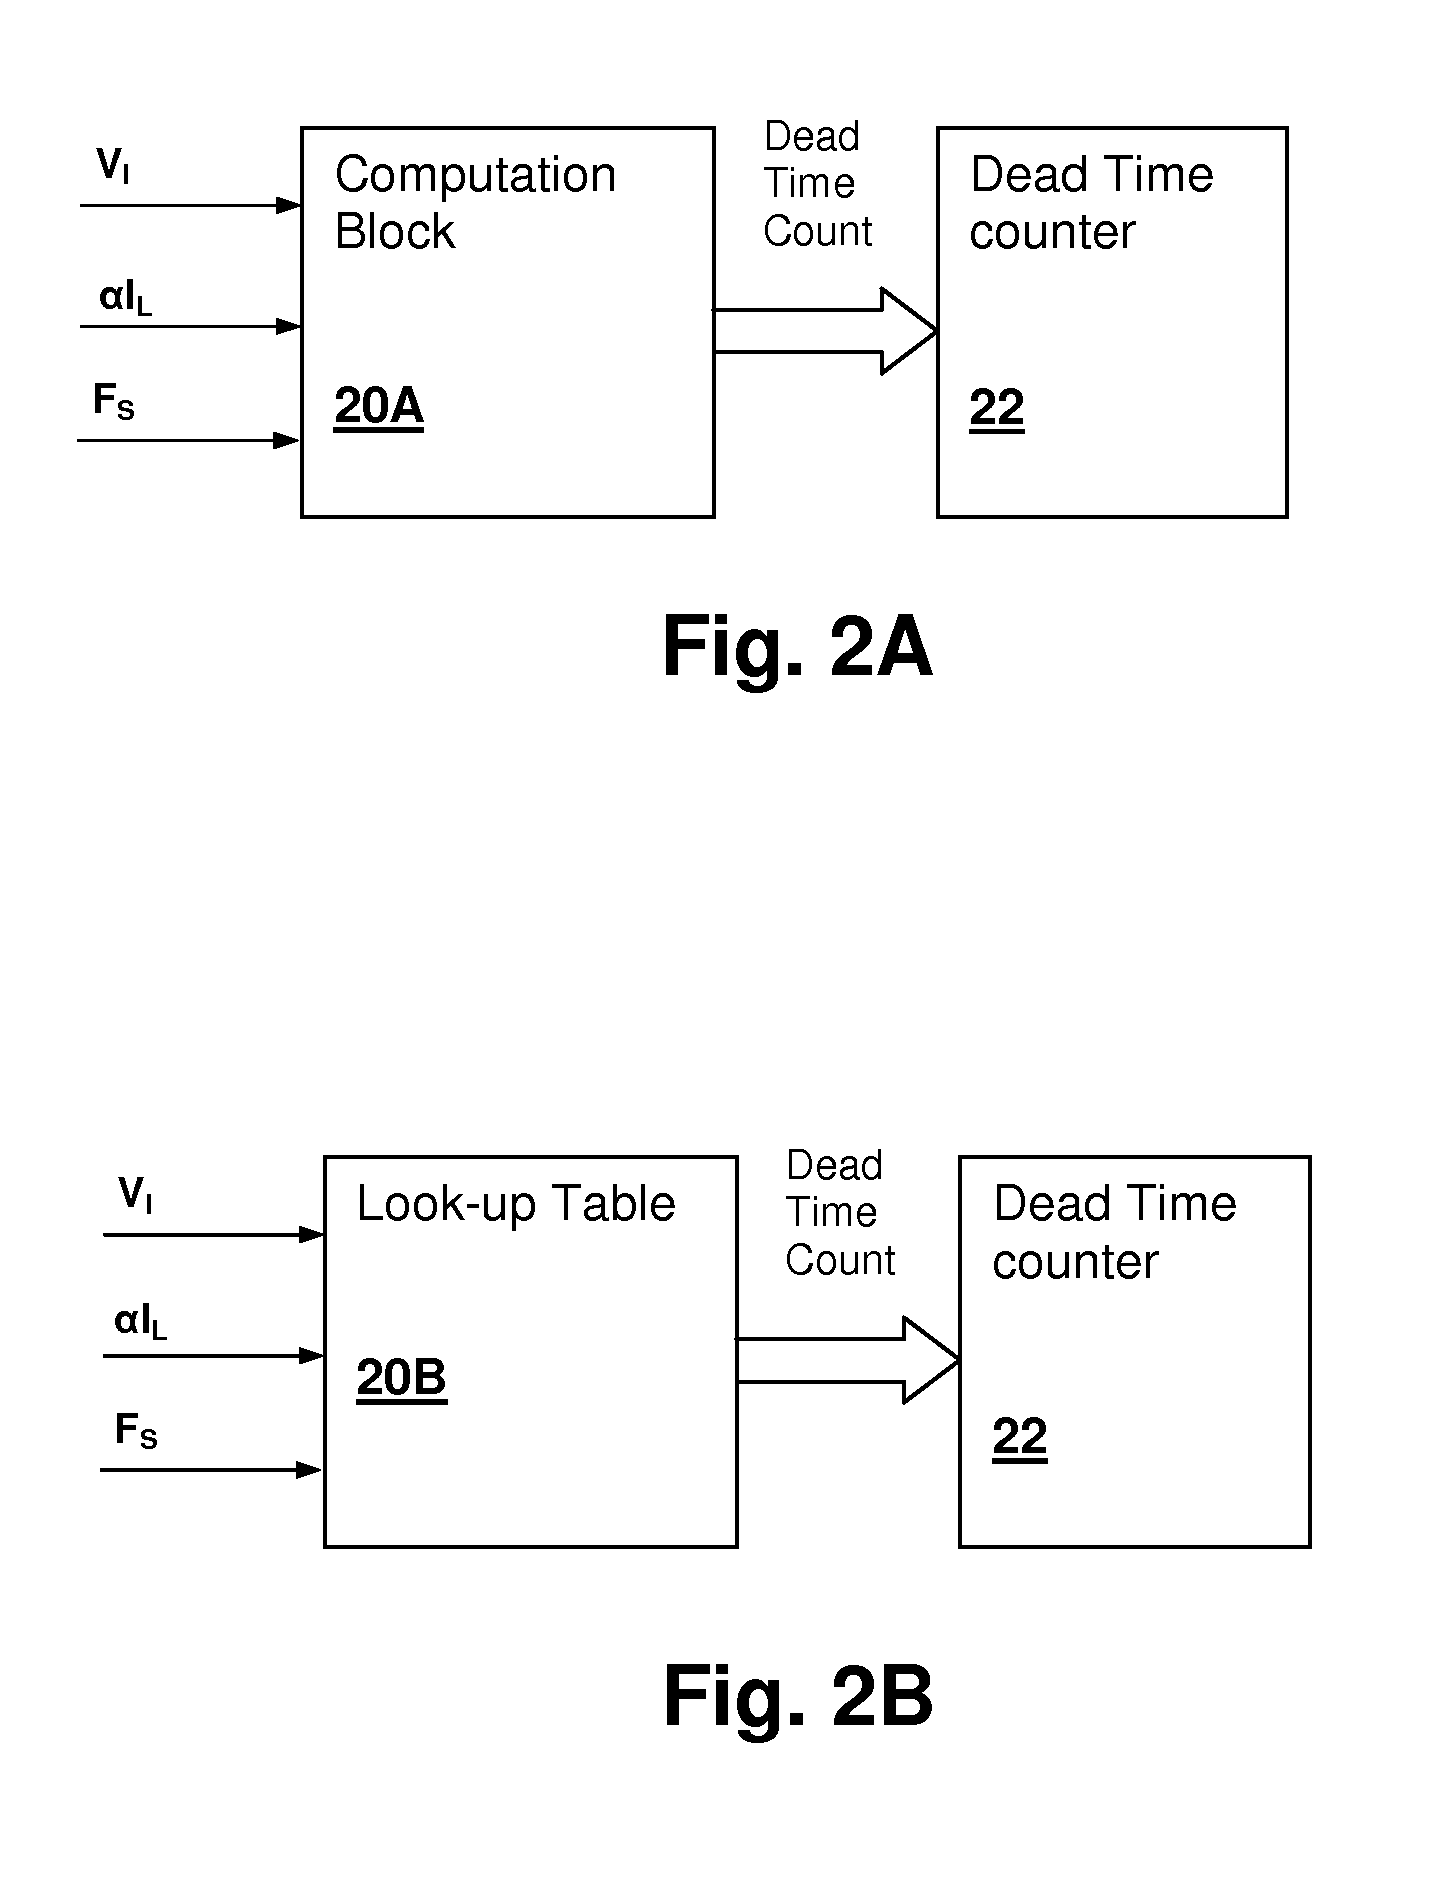 Resonant switching power converter with adaptive dead time control